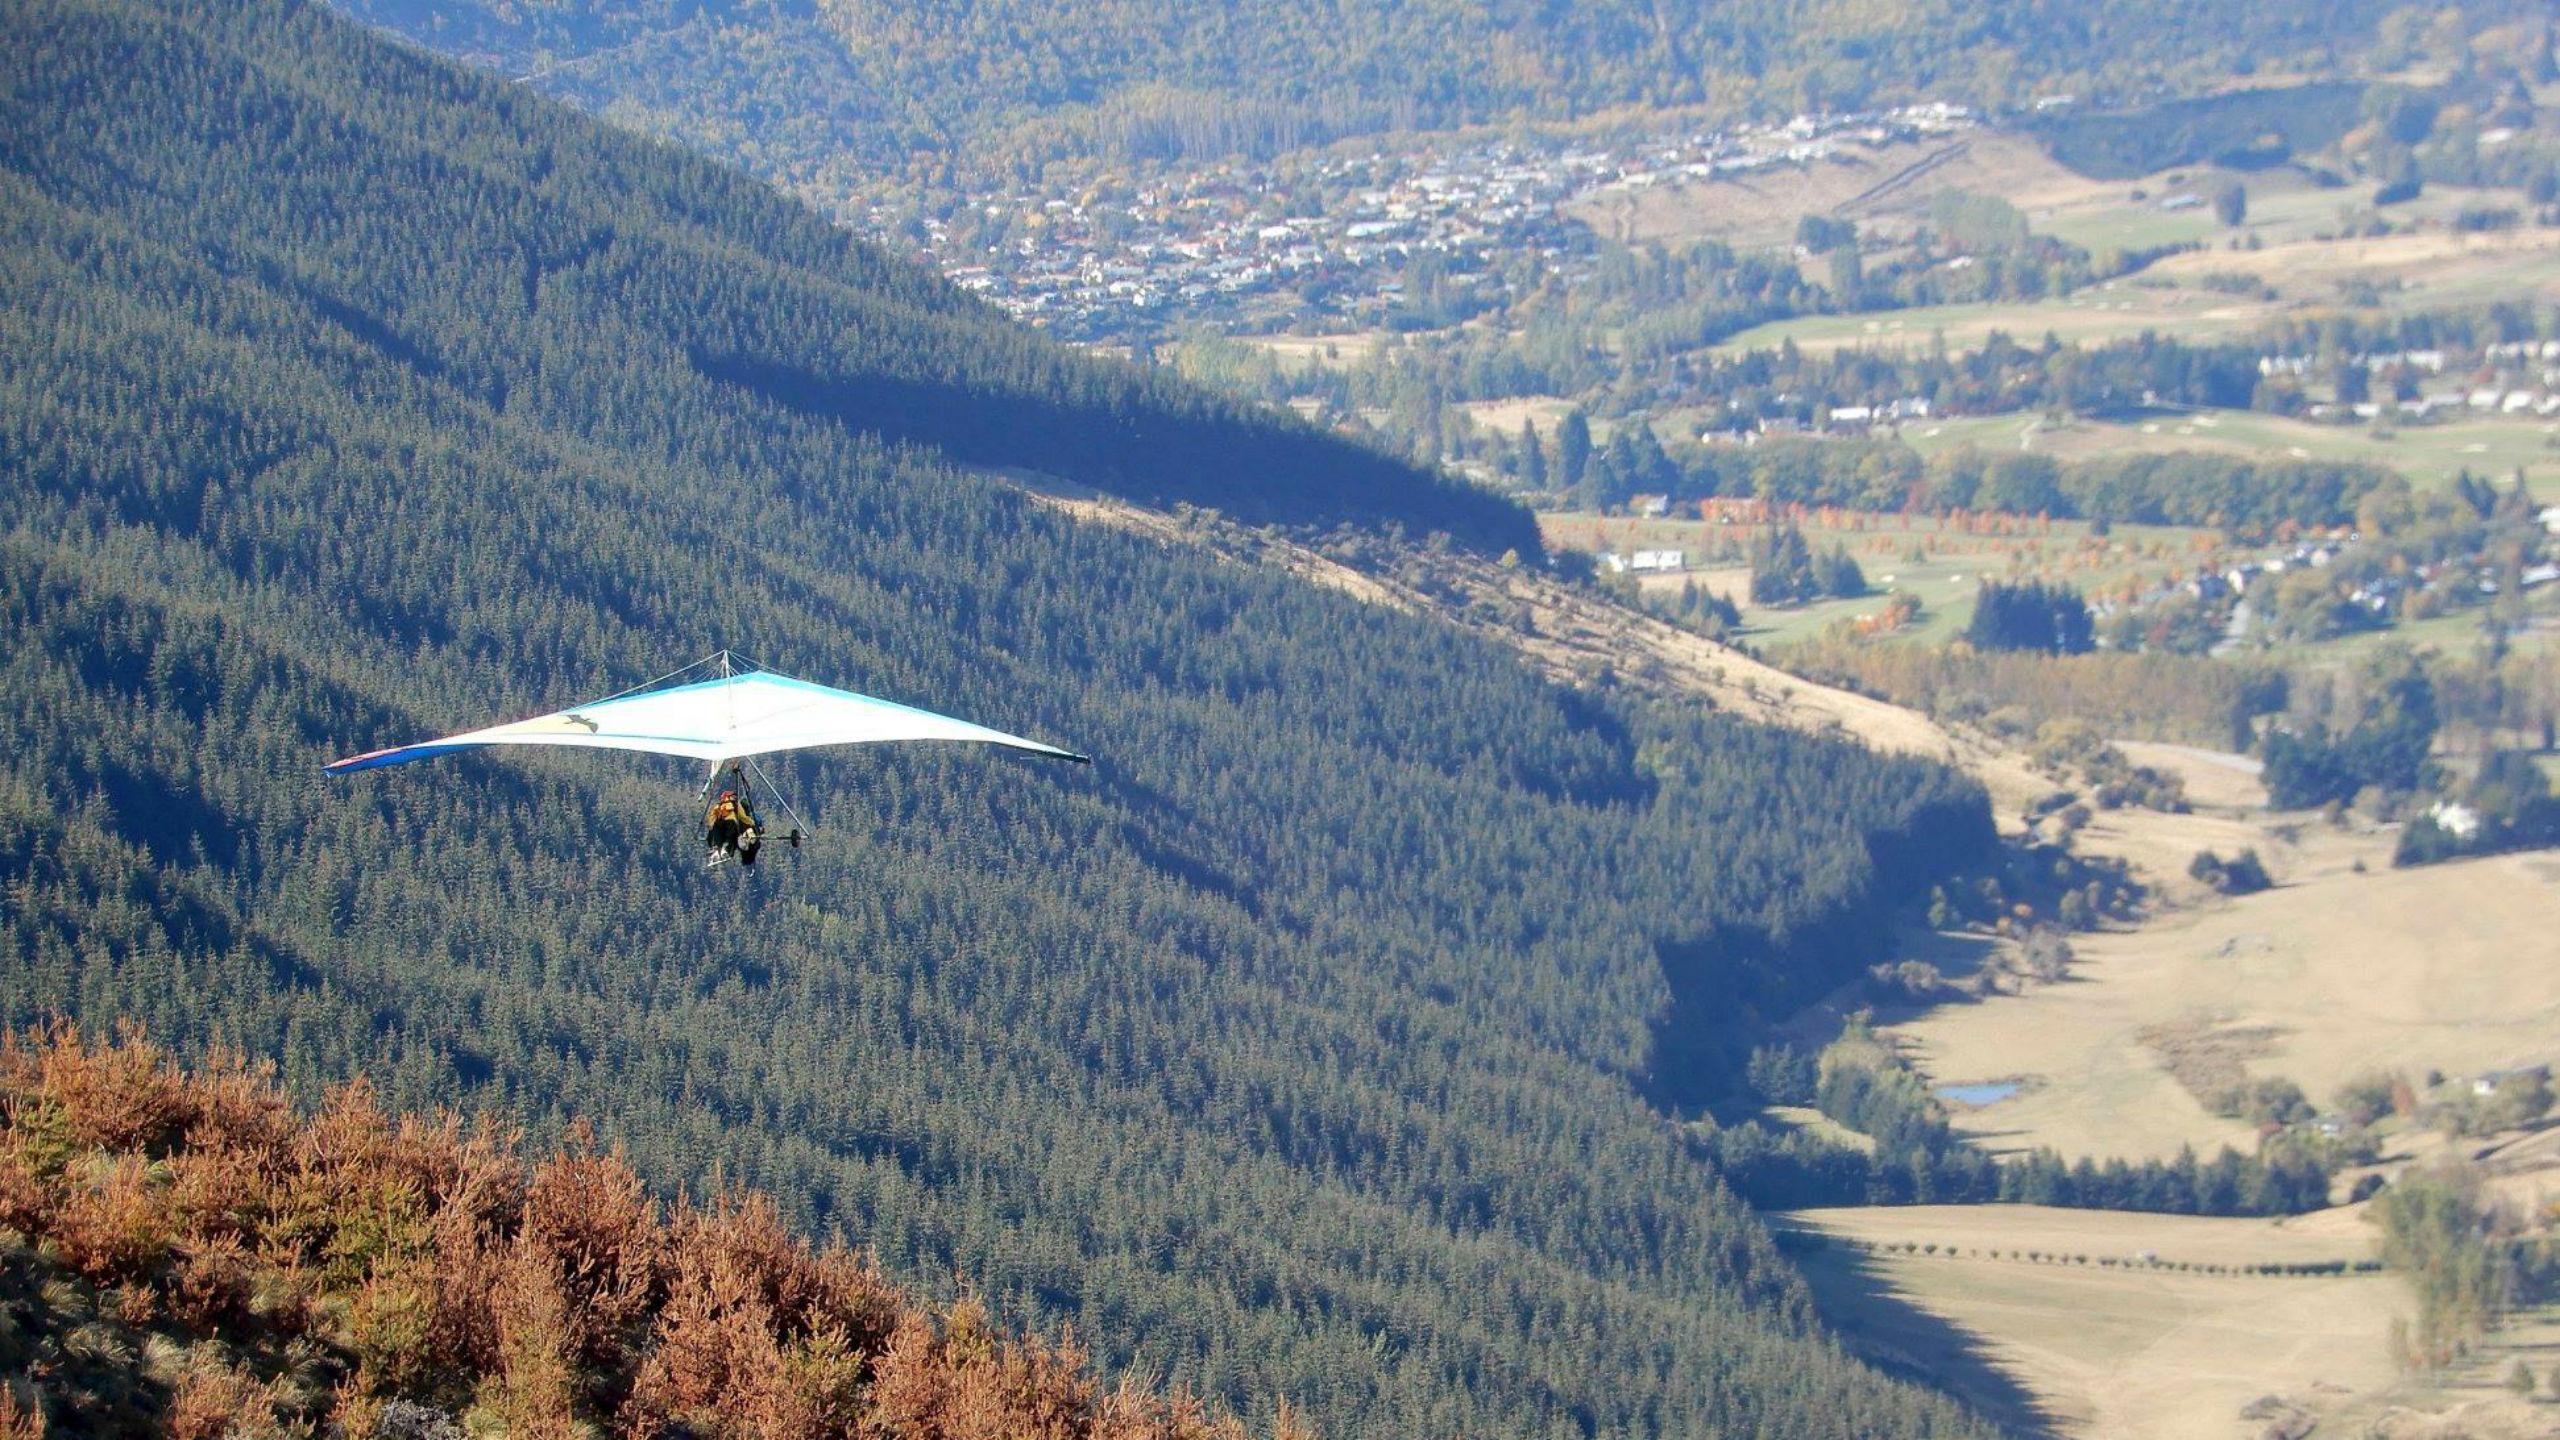 Gliding: Hang Gliding in Queenstown, New Zealand, Extreme air sport. 2560x1440 HD Wallpaper.